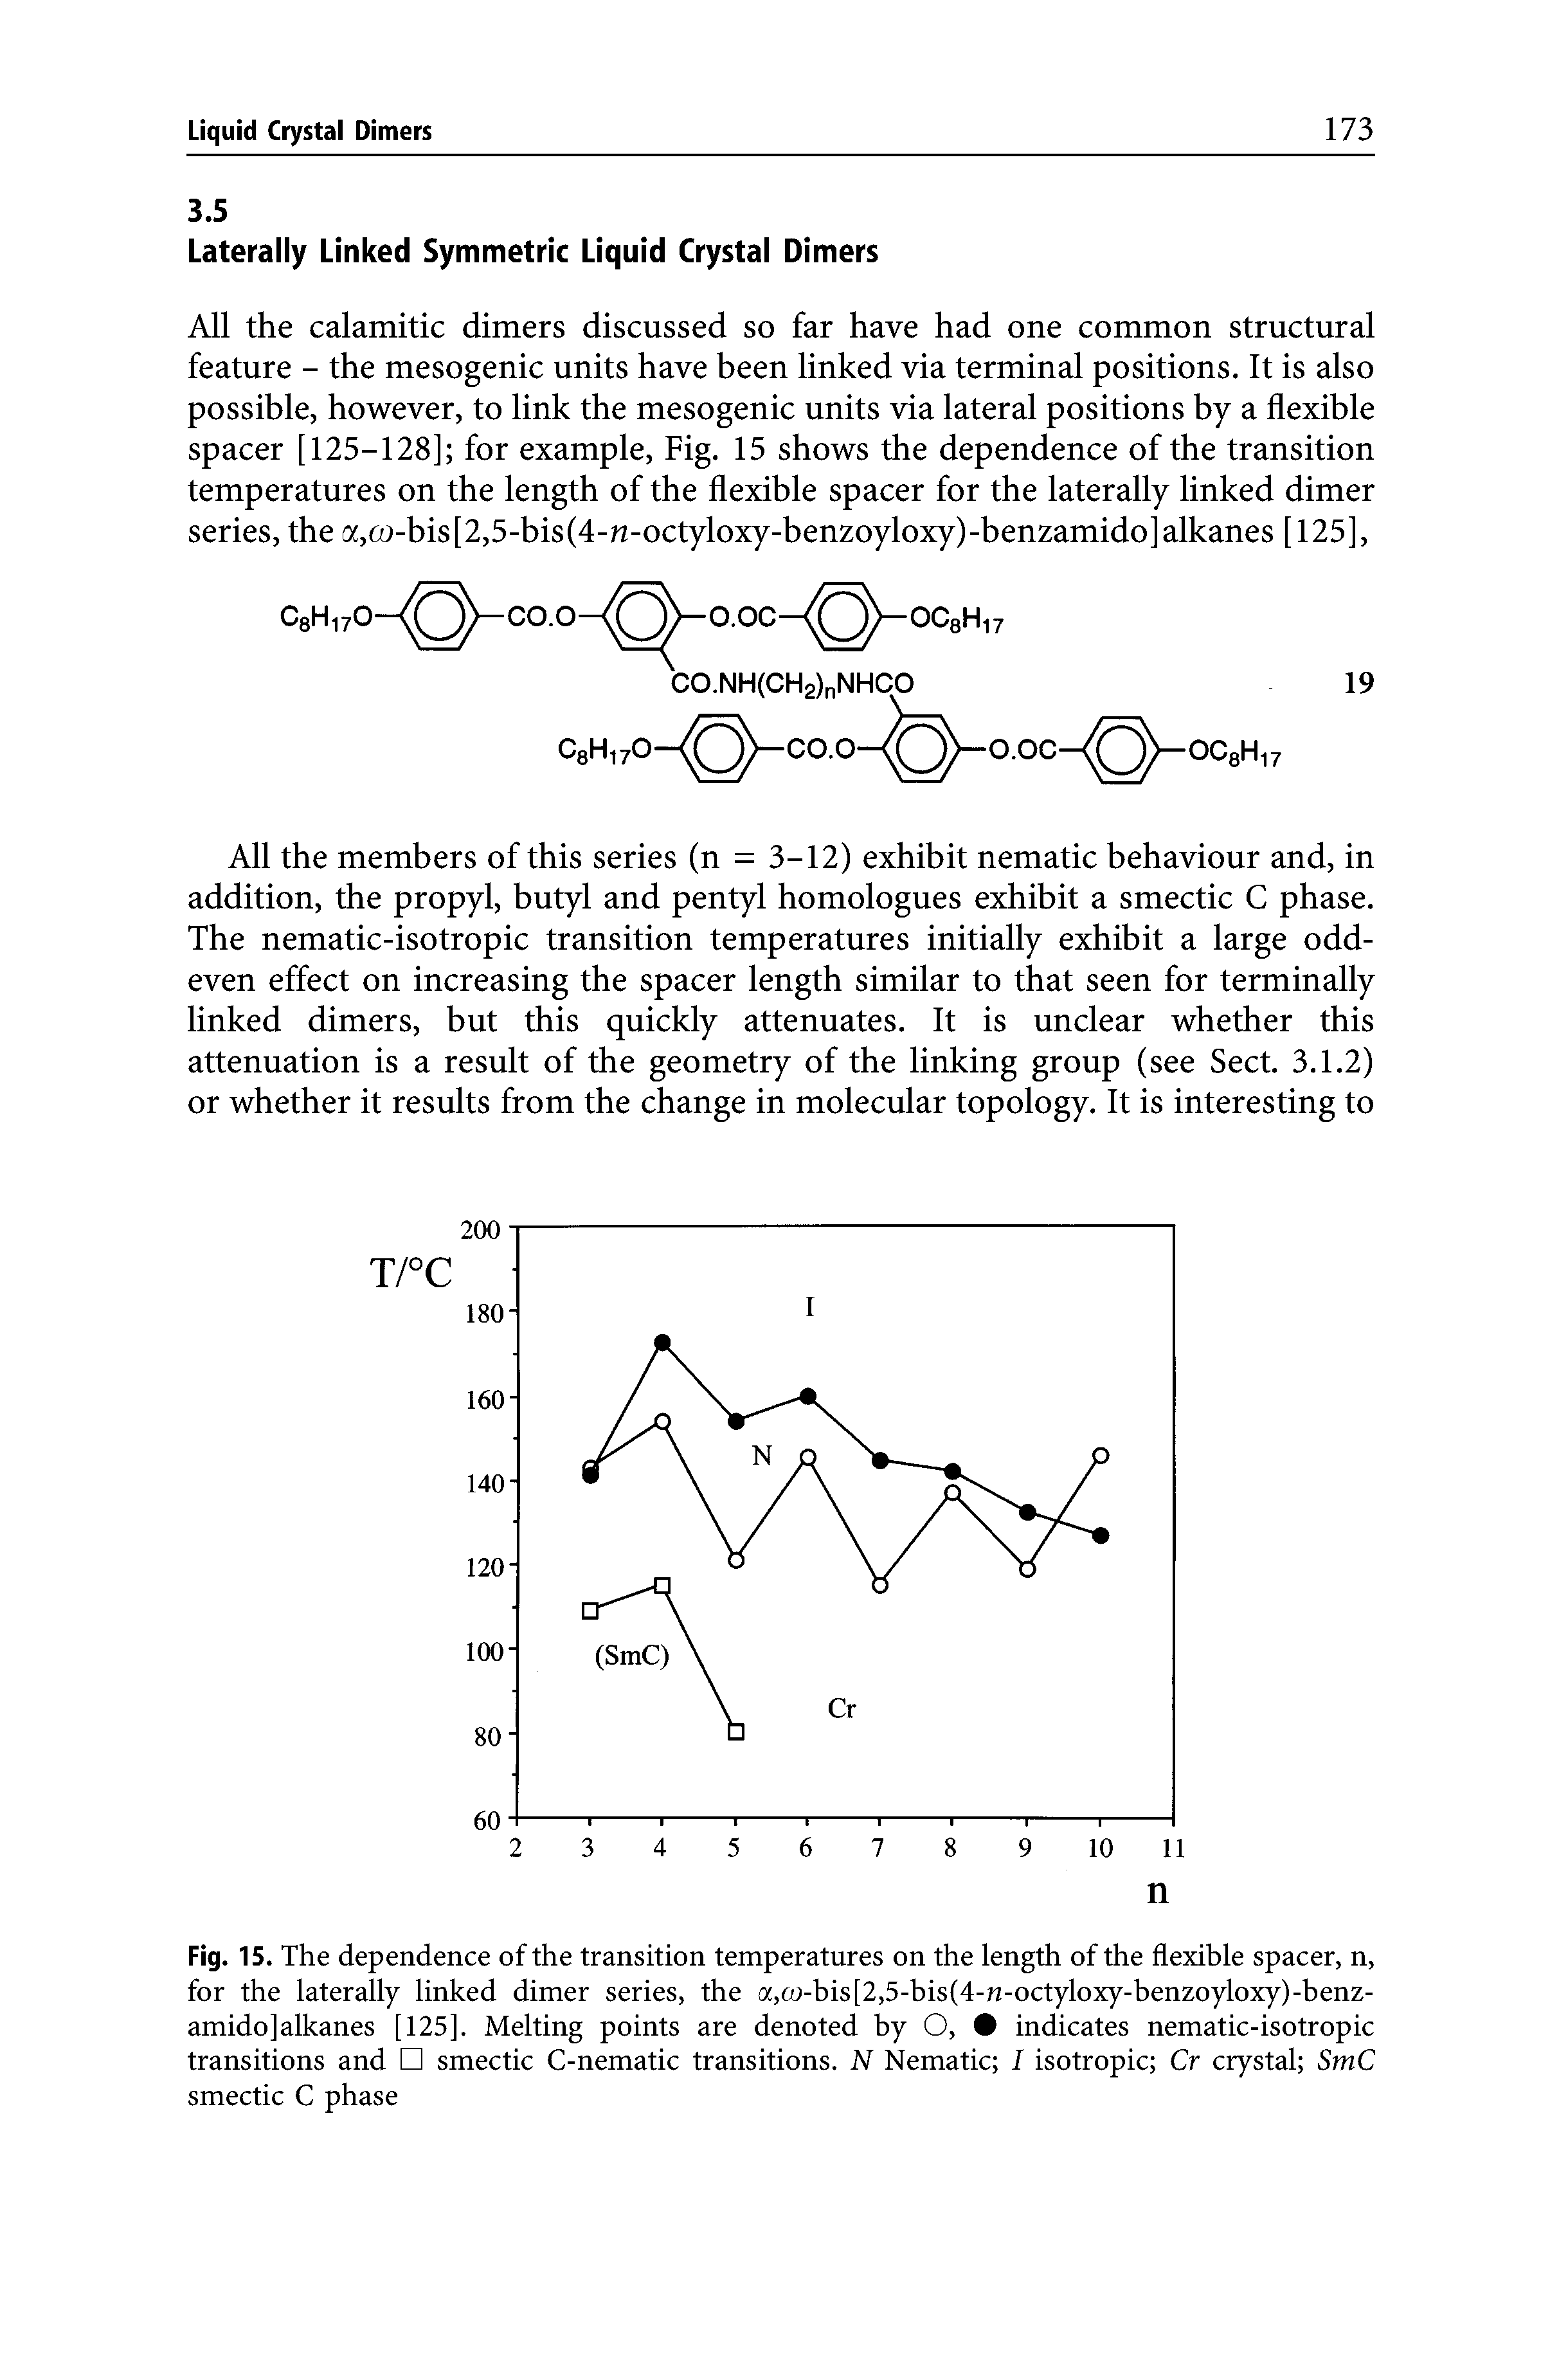 Fig. 15. The dependence of the transition temperatures on the length of the flexible spacer, n, for the laterally linked dimer series, the a,(u-his[2,5-his(4-n-octyloxy-henzoyloxy)-henz-amido]alkanes [125]. Melting points are denoted hy O, indicates nematic-isotropic transitions and smectic C-nematic transitions. N Nematic I isotropic Cr crystal SmC smectic C phase...